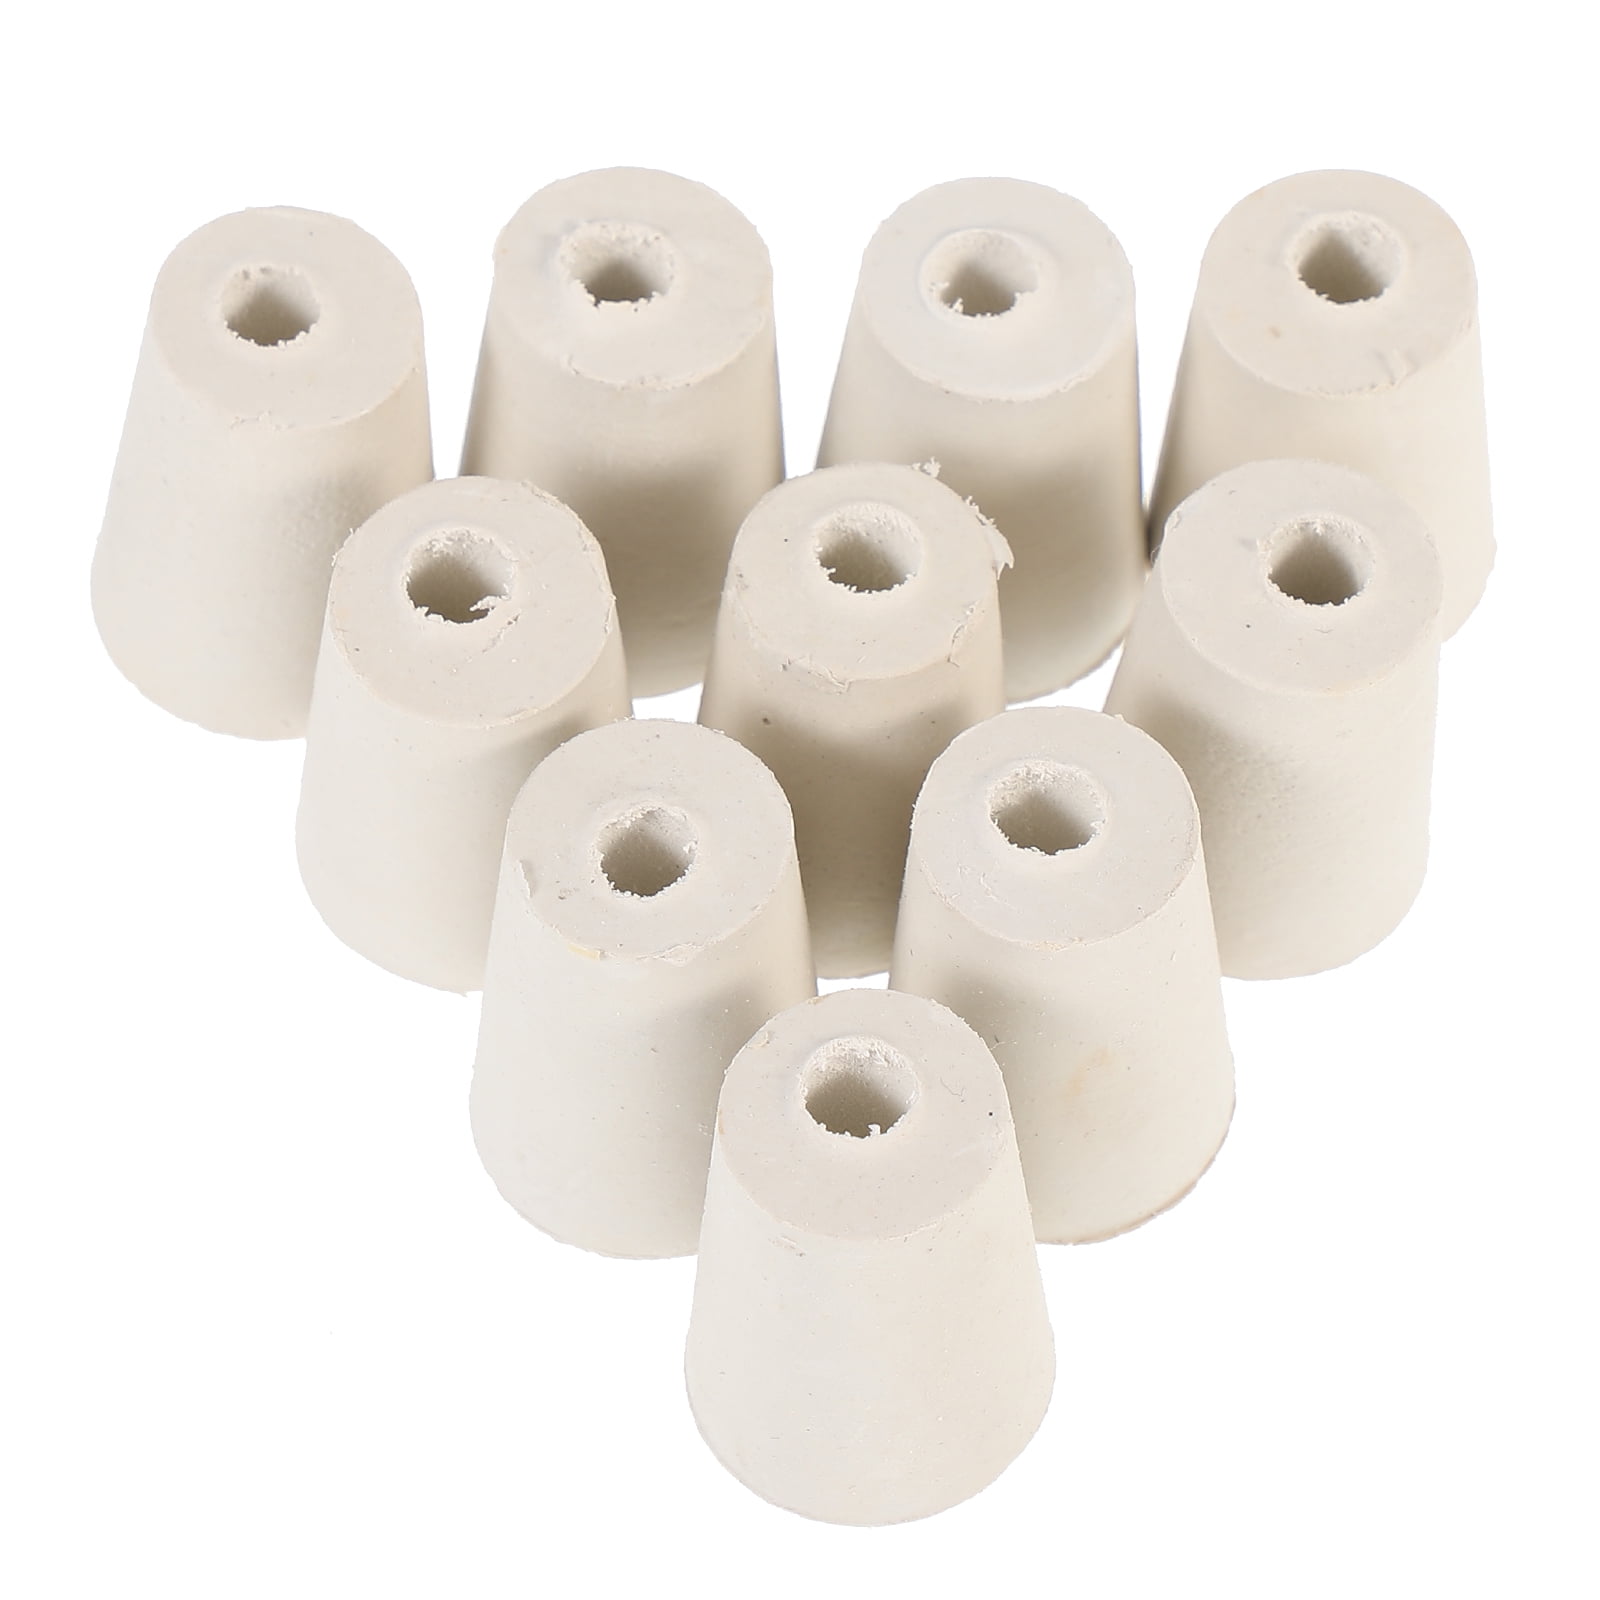 15 Sizes Rubber Stopper Bungs Laboratory Sealing Hole Stopper Tapered Flask  Tube